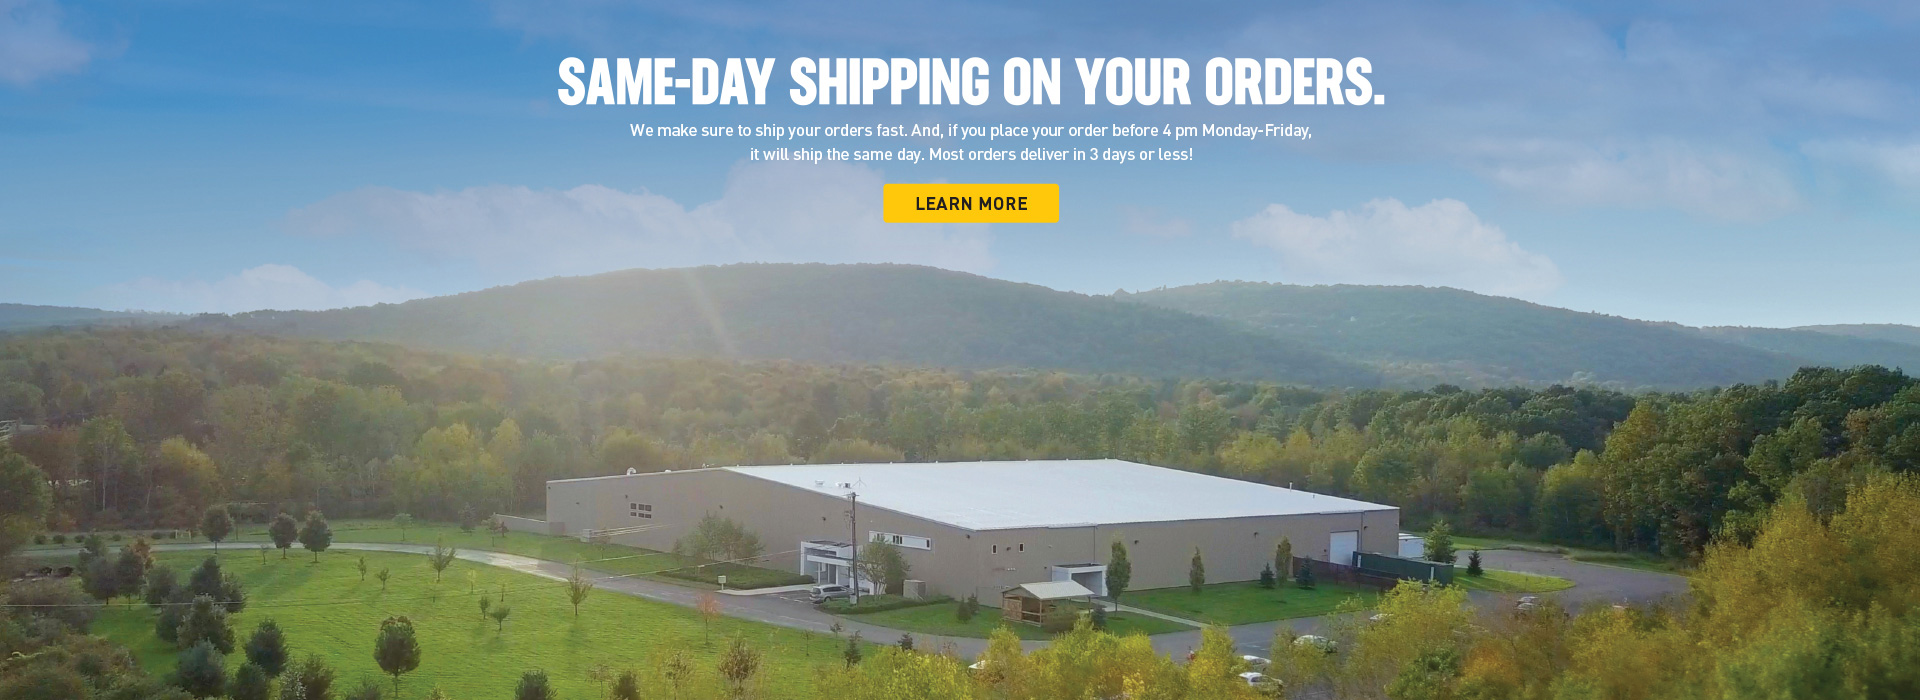 Same-day shipping on your orders. We make sure to ship your orders fast. And, if you  syour order before 4 pm Monday-Friday, it will ship the same day. Most orders deliver in 3 days or less!